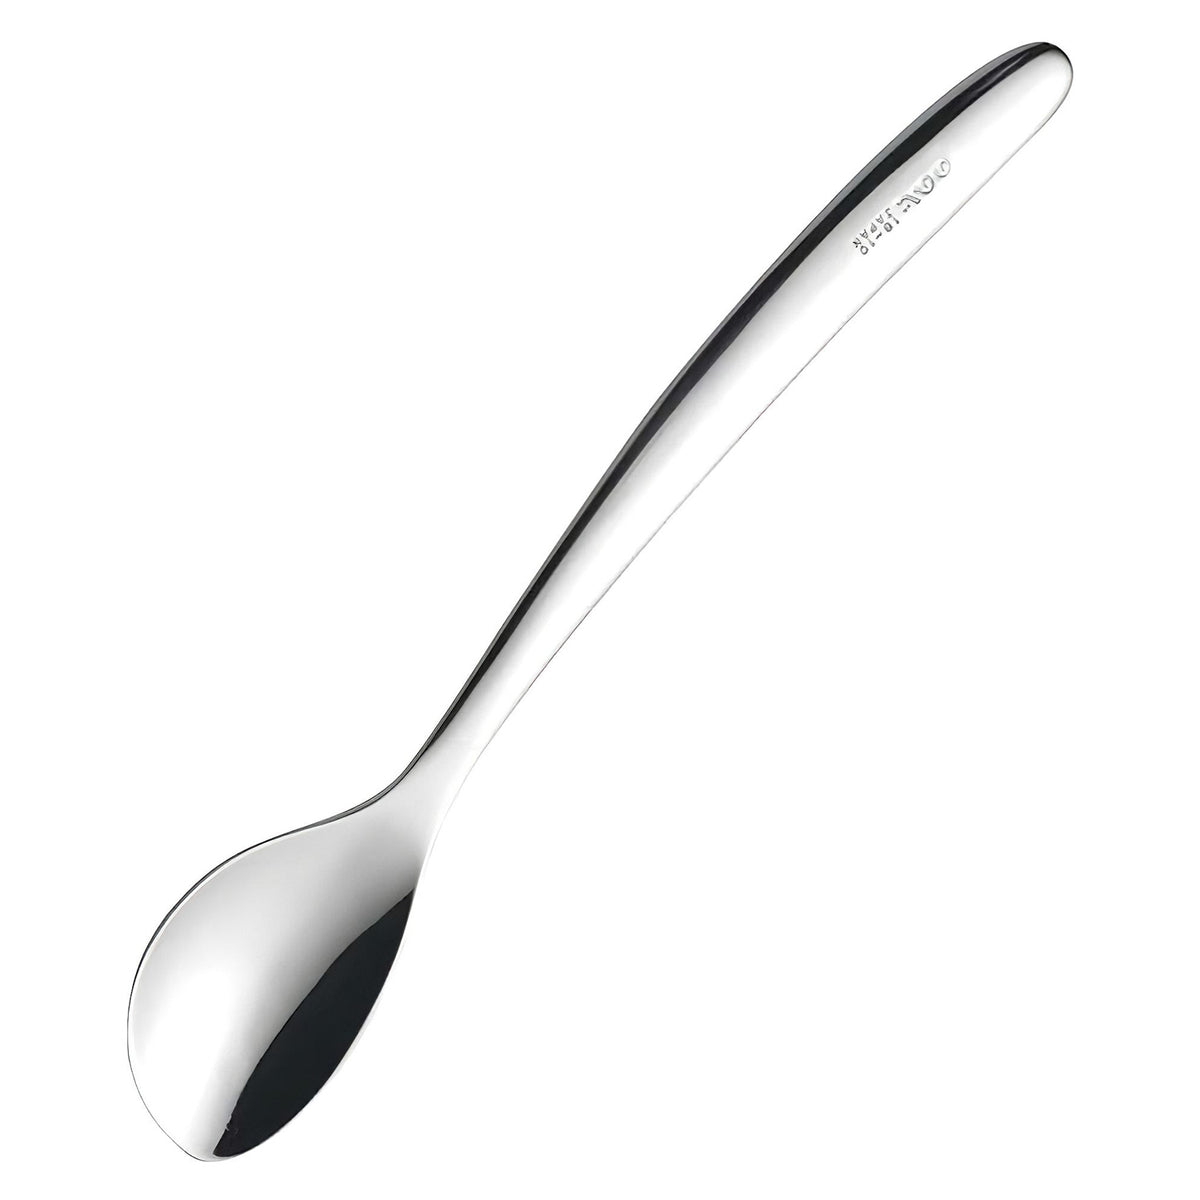 Nonoji UD Stainless Spoon for Toddler